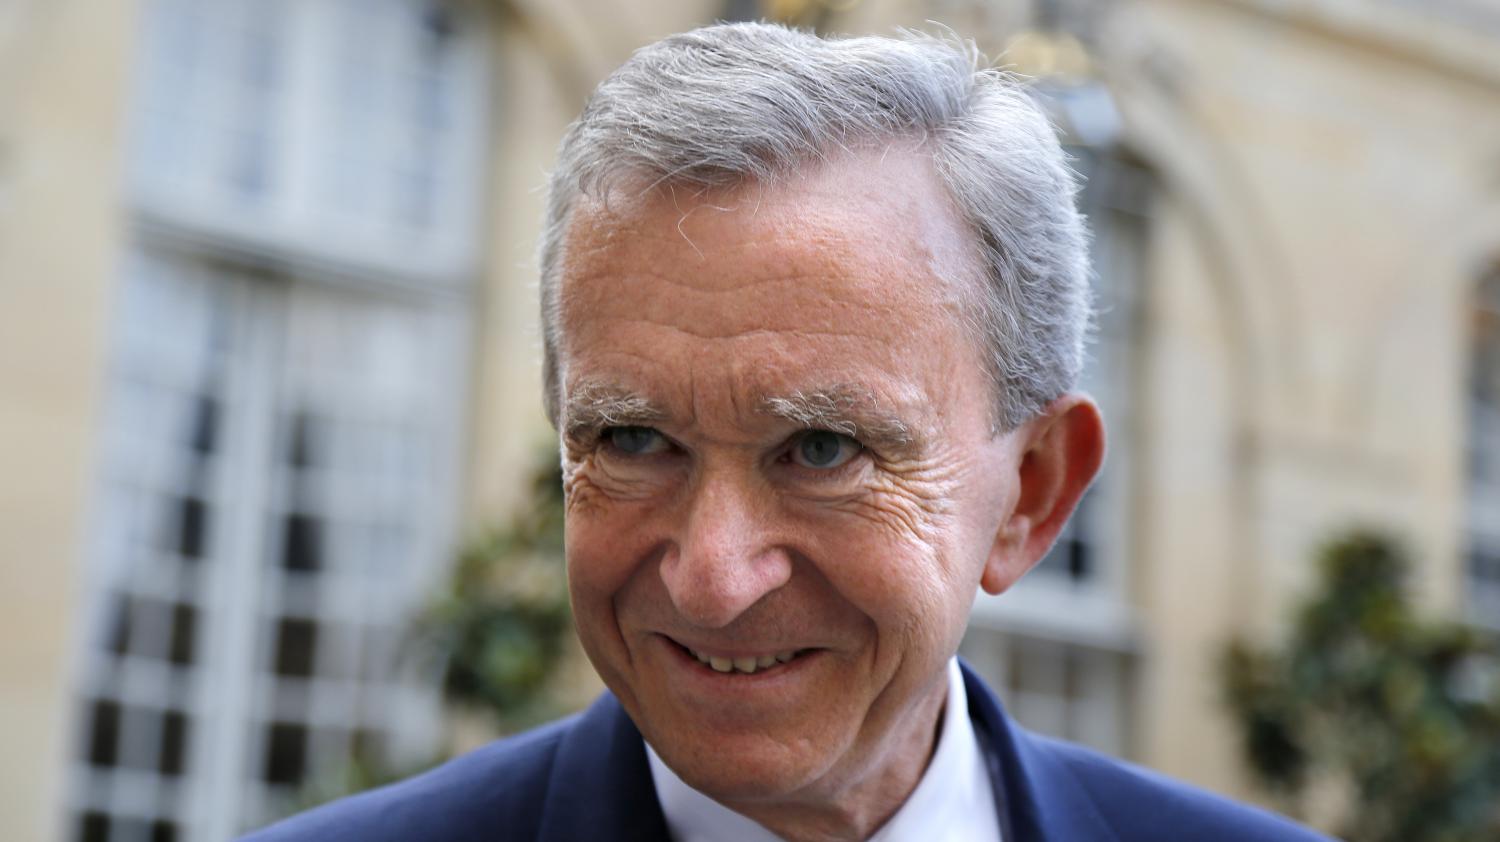 Replying to @user125905005232 This kid is so “humble”, Bernard Arnault